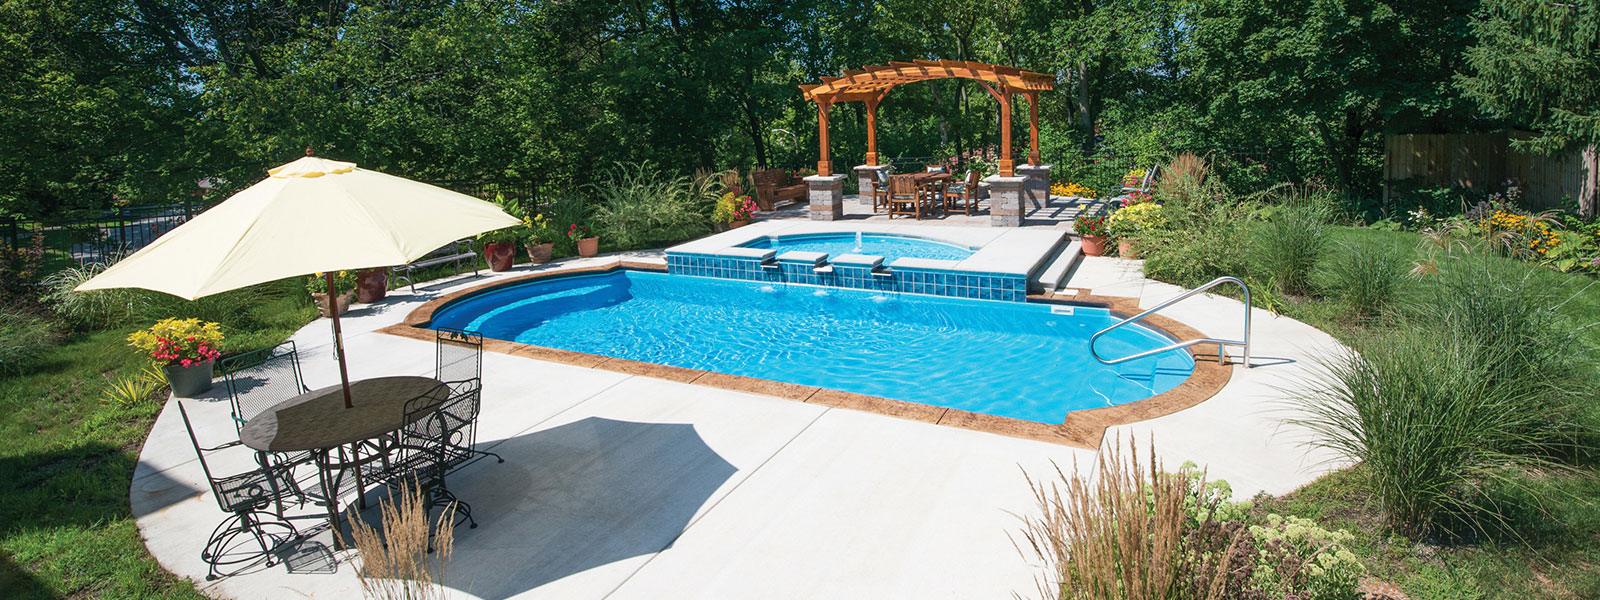 Ask the General: When is the Best Time to Open My Pool?